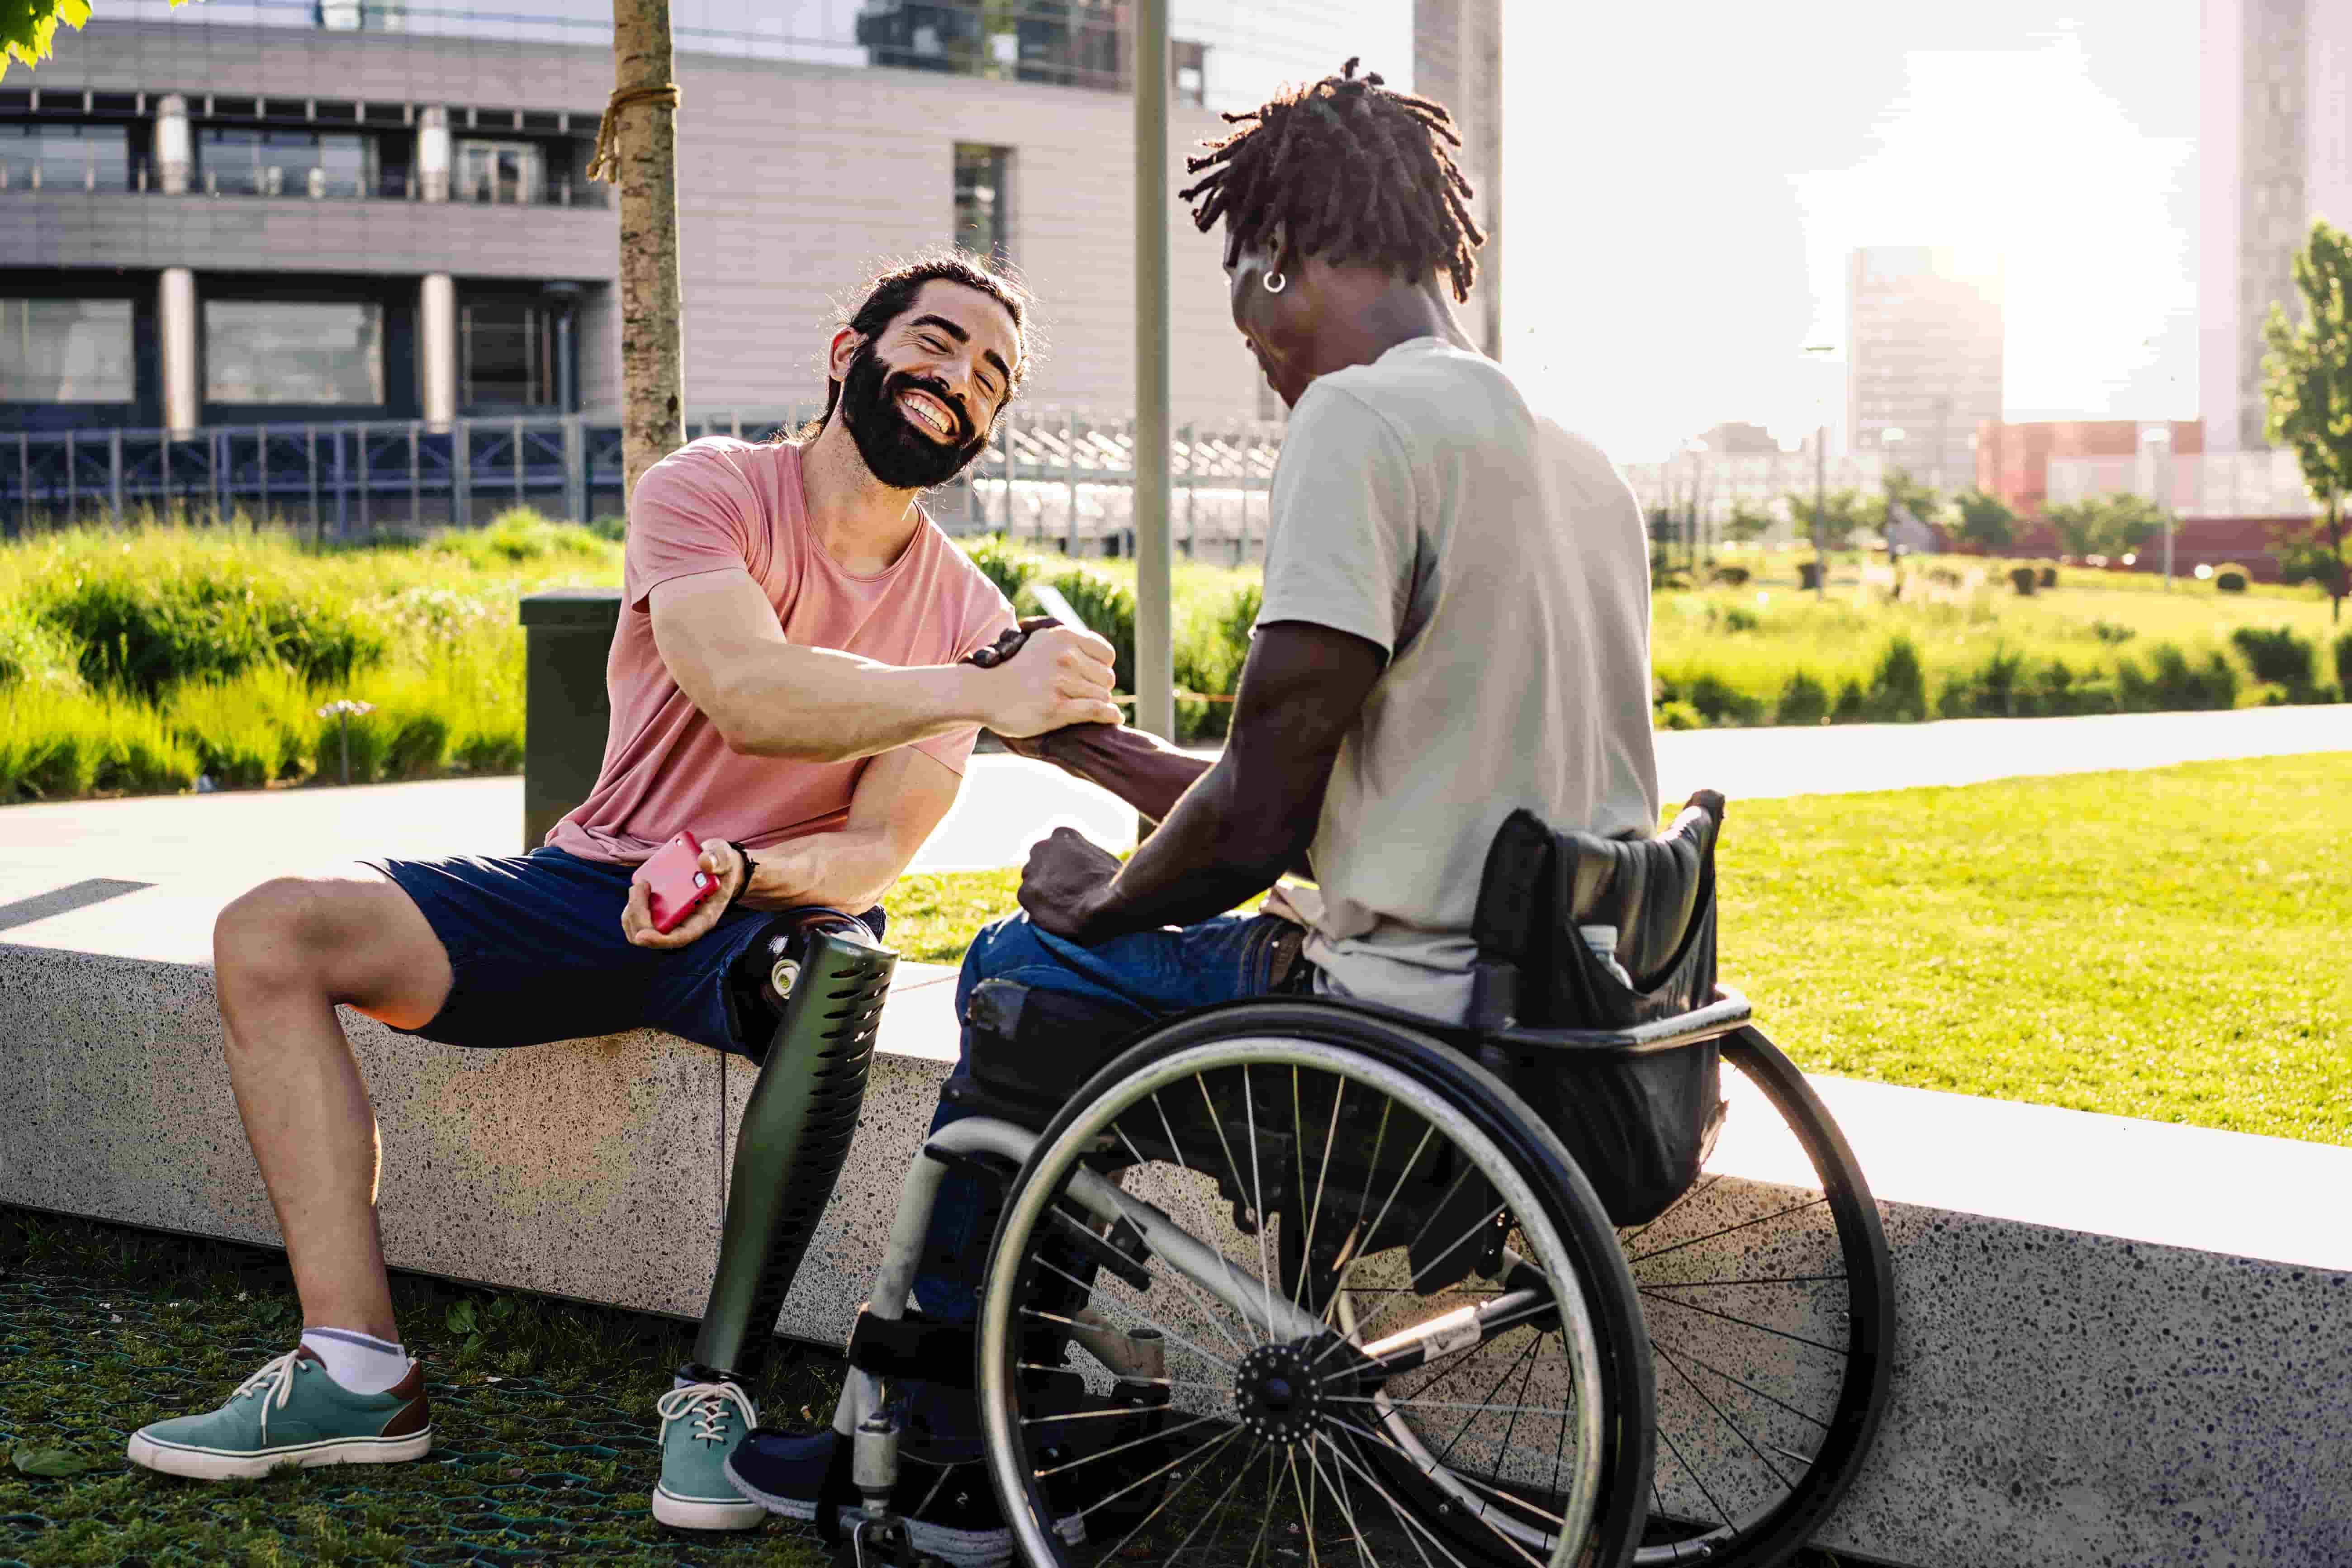 A man with a prosthetic leg shakes hands with a man in a wheelchair.